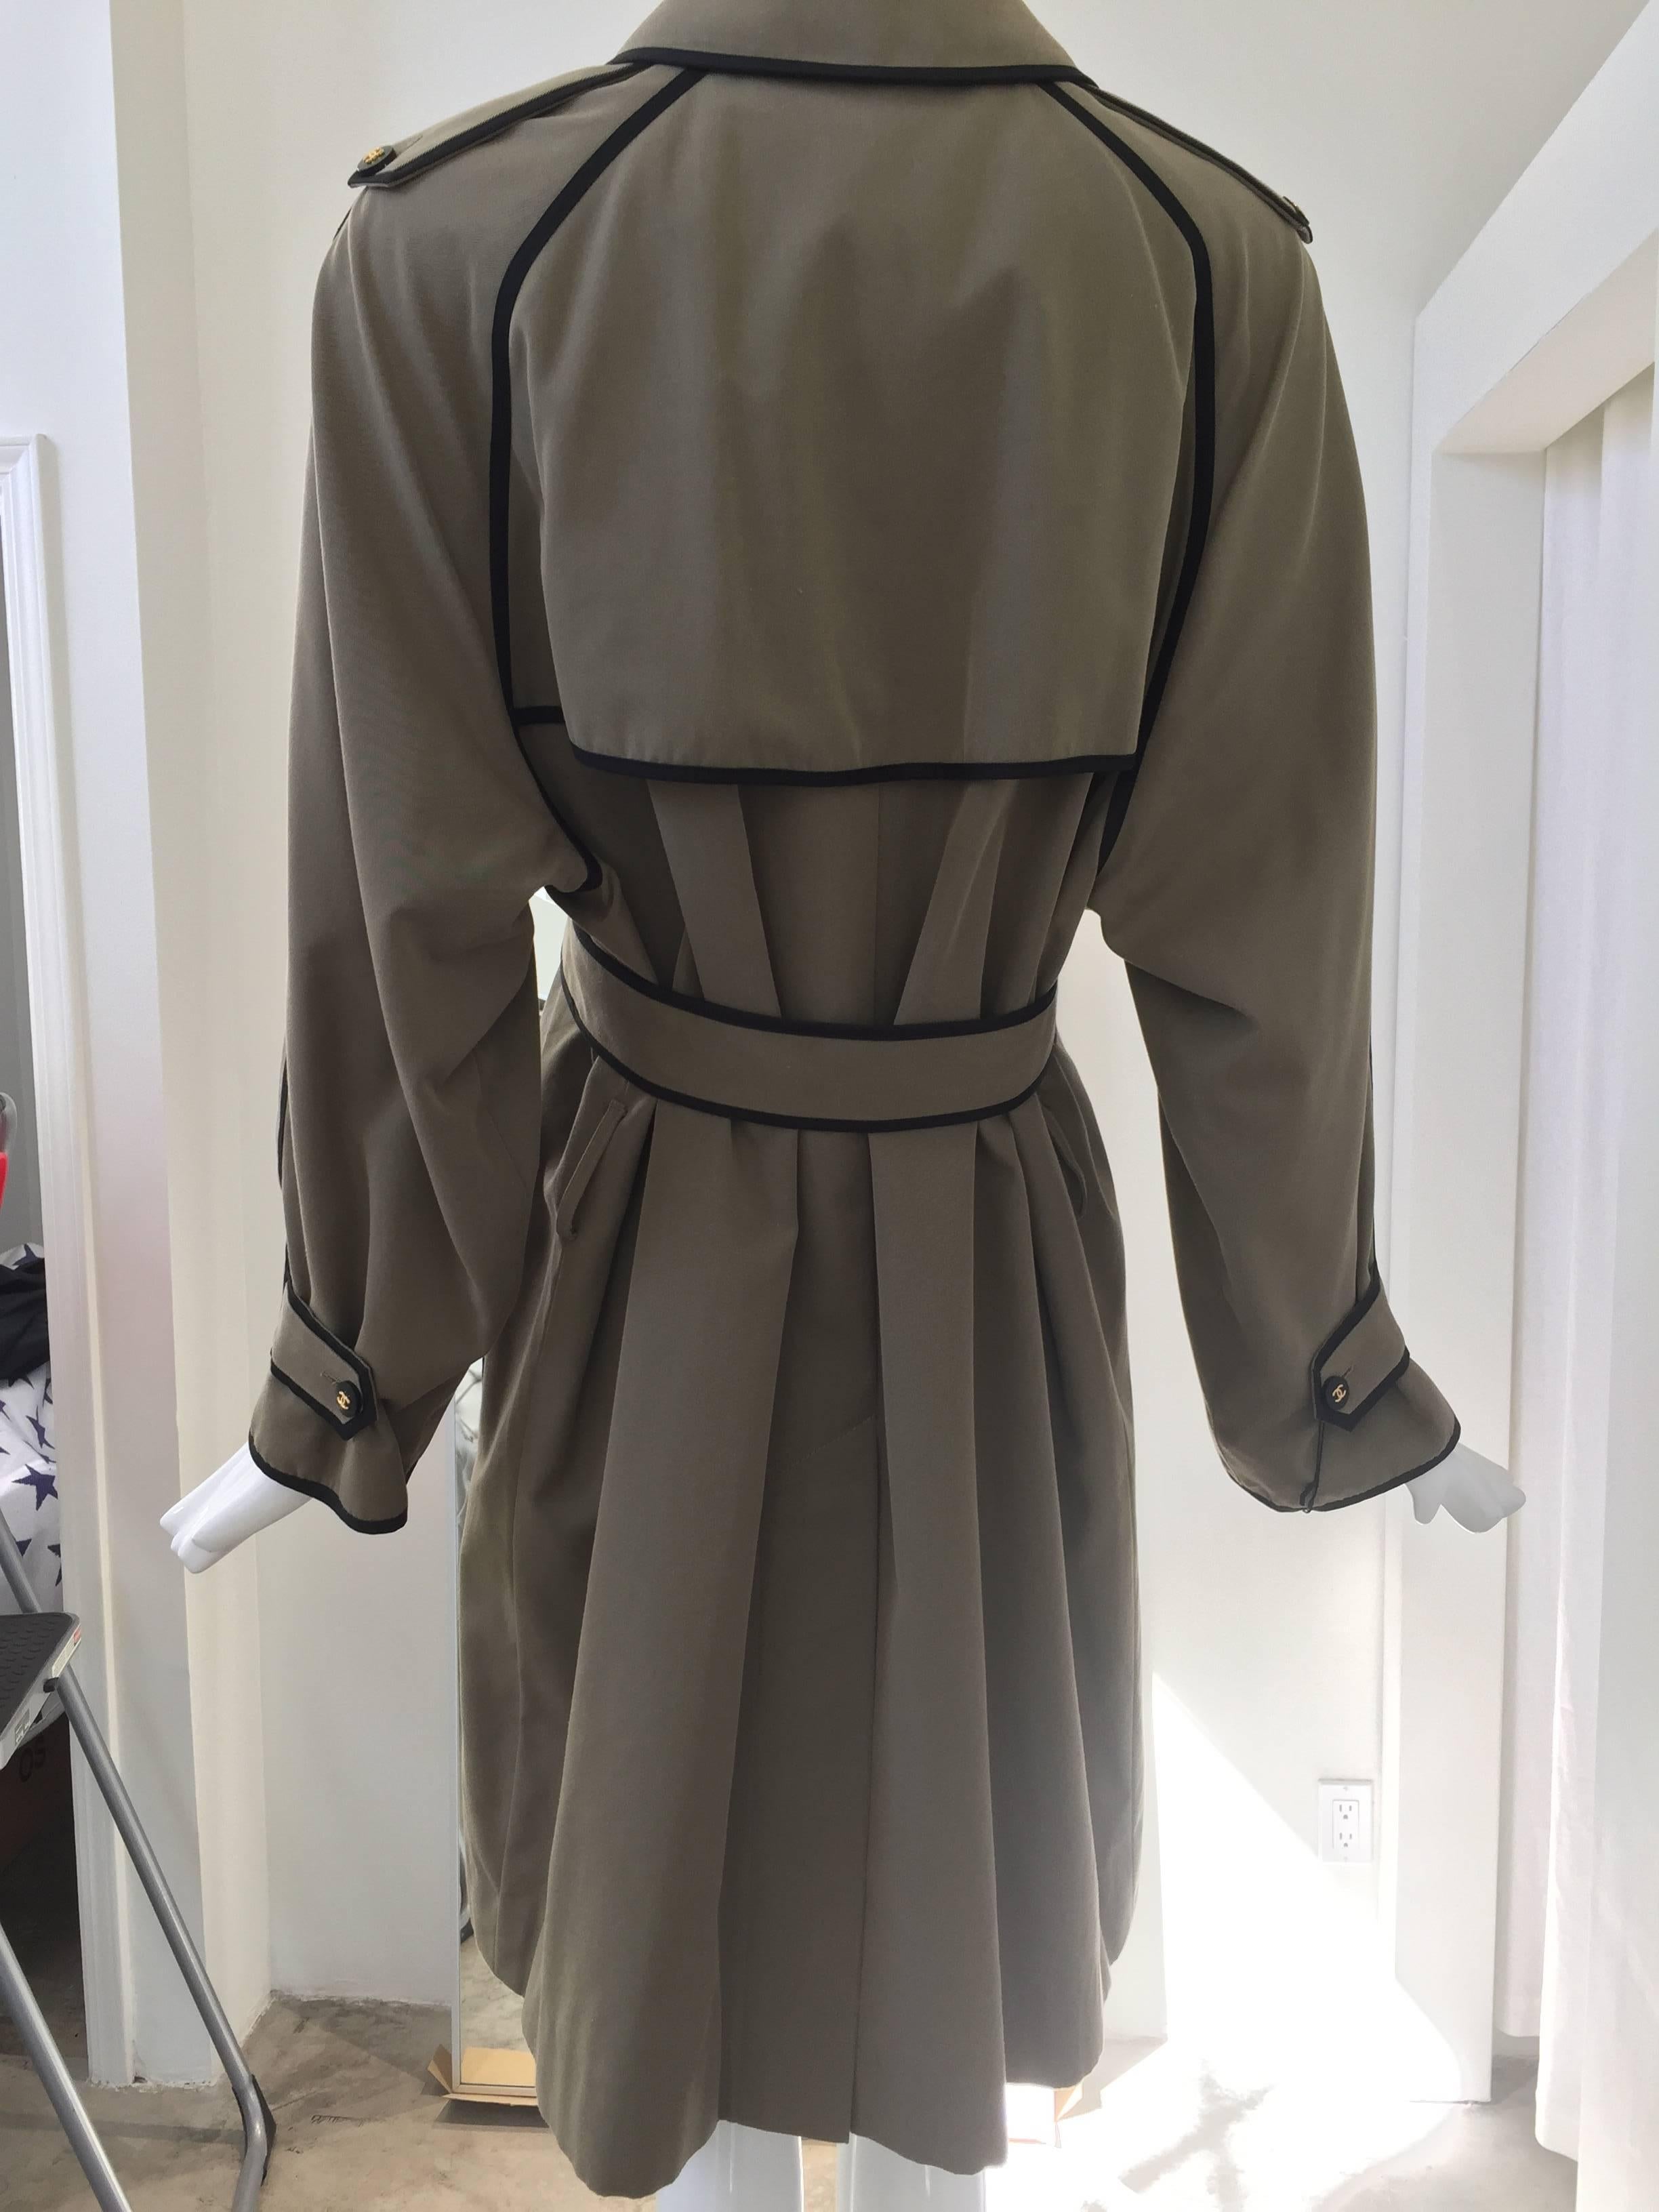 Women's 1980s CHANEL olive green cotton trench coat